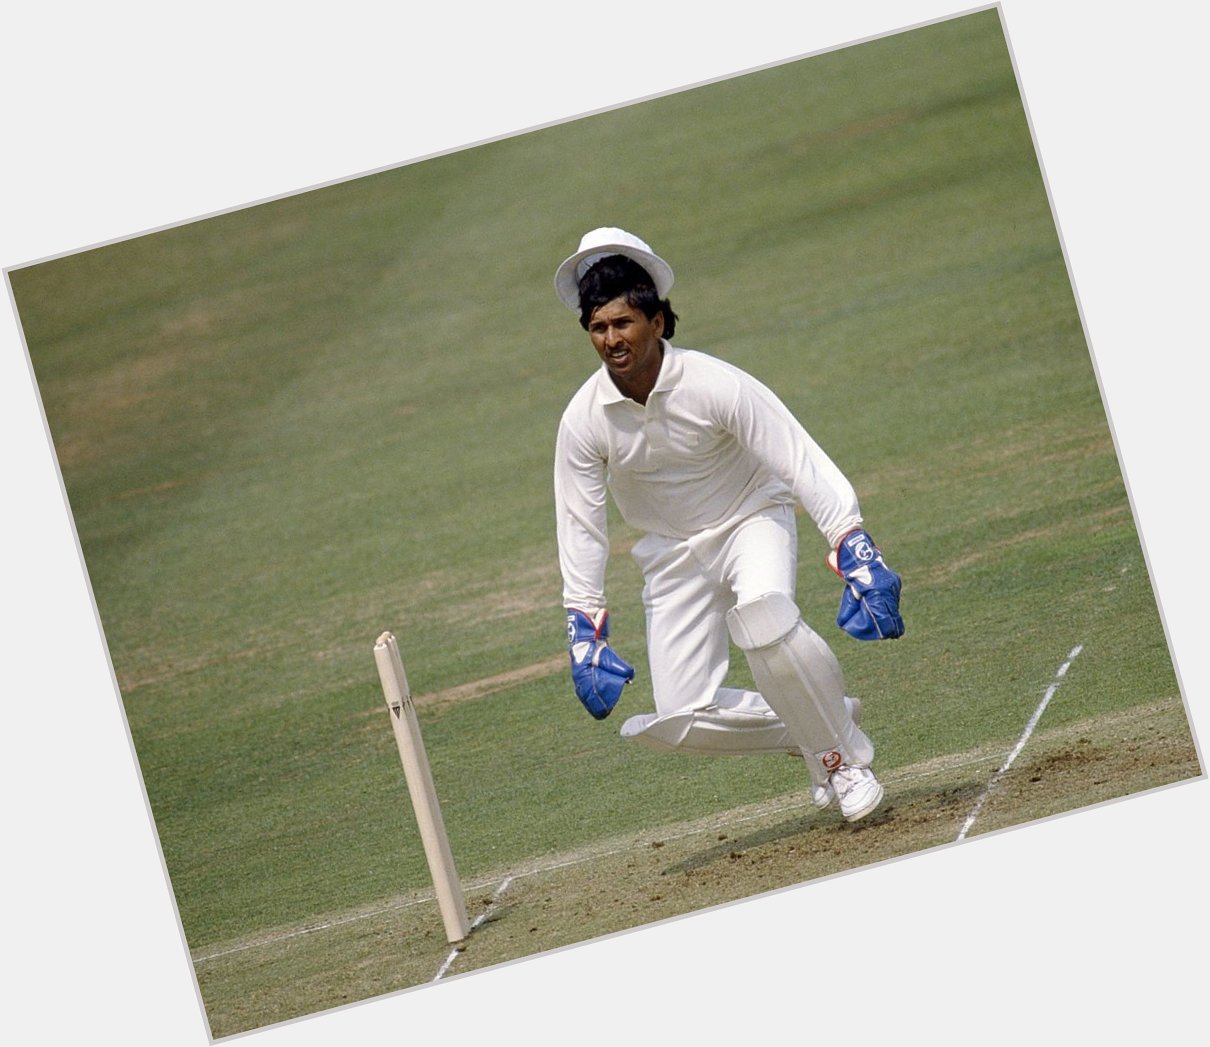 Happy birthday to one of Indians most entertaining Wicket Keepers and former Chief Selectors of India 